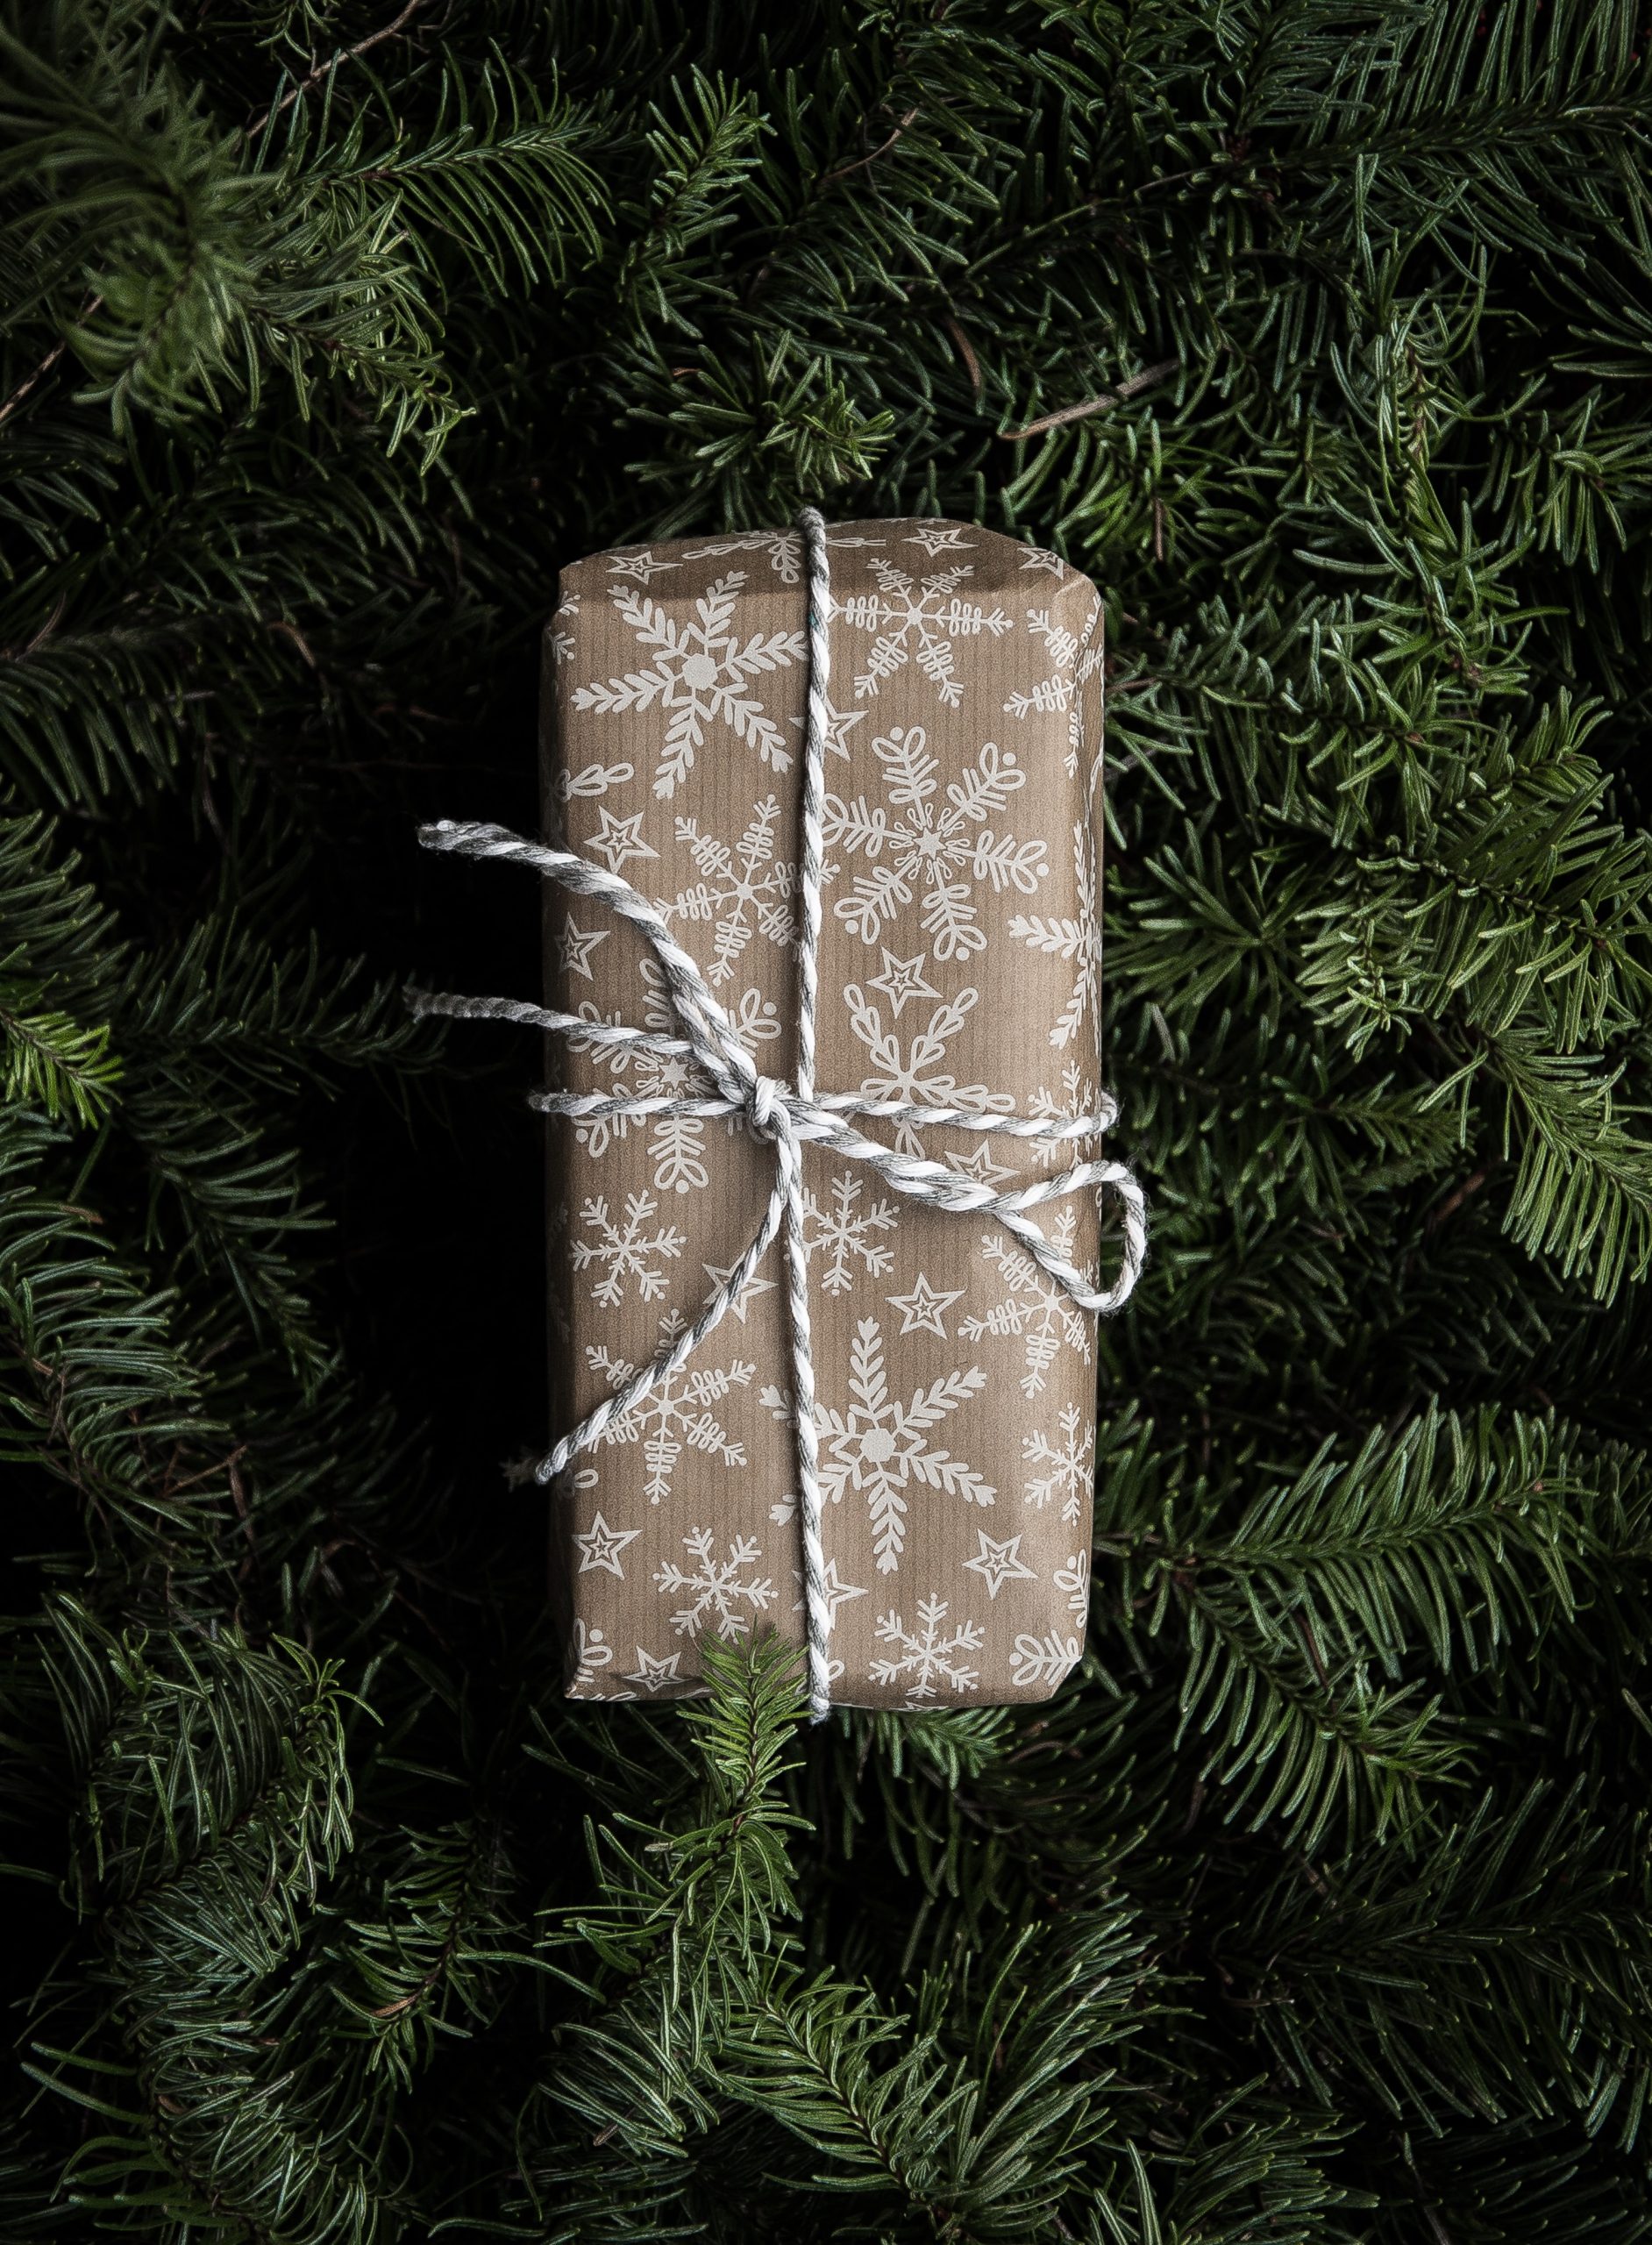 Do You Exchange Christmas Gifts With Your Spouse?